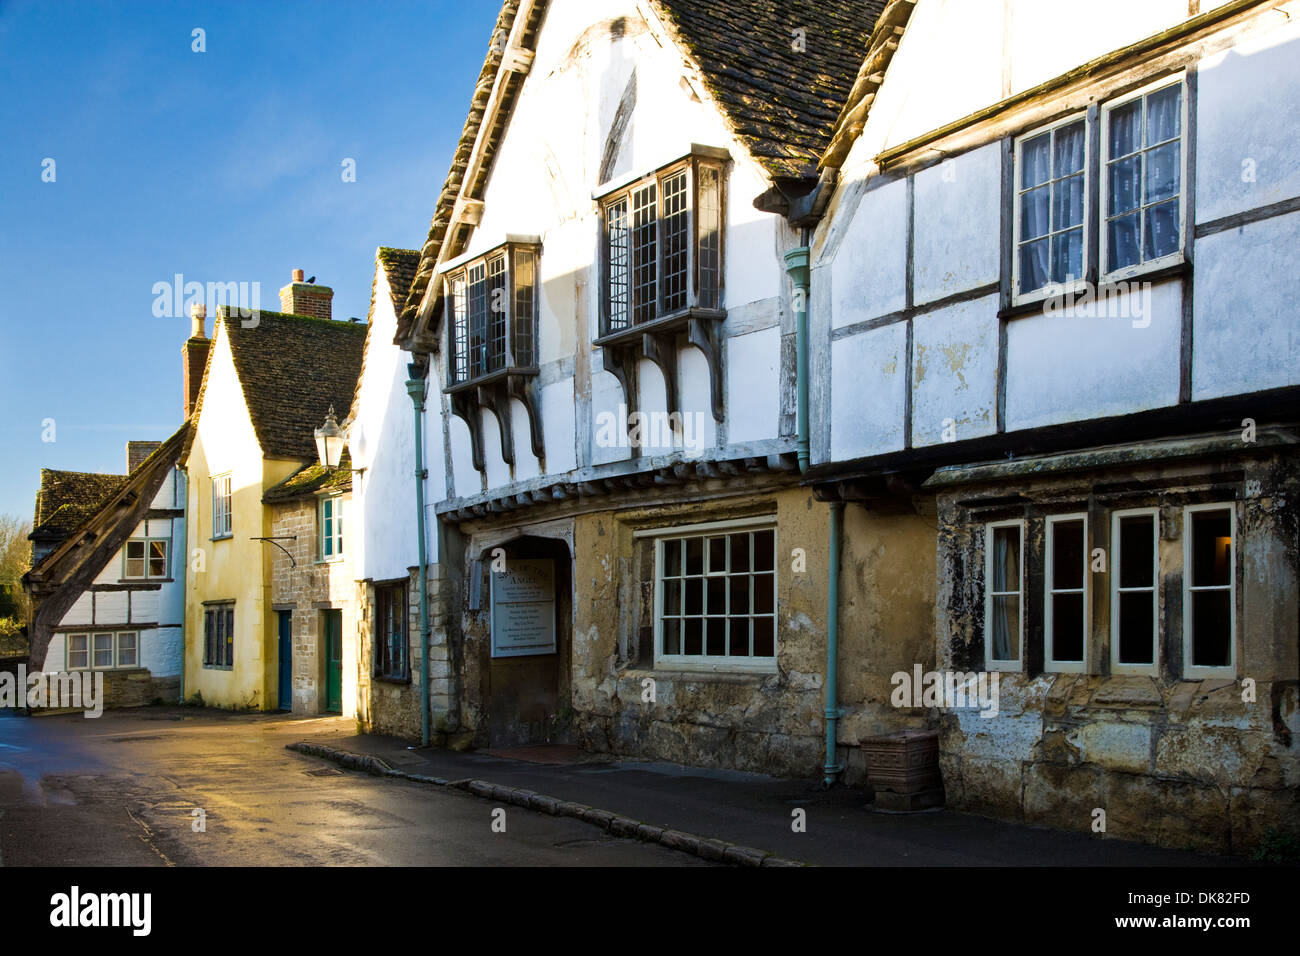 At the Sign of the Angel, one of the most famous medieval houses in the Wiltshire village of Lacock. Stock Photo